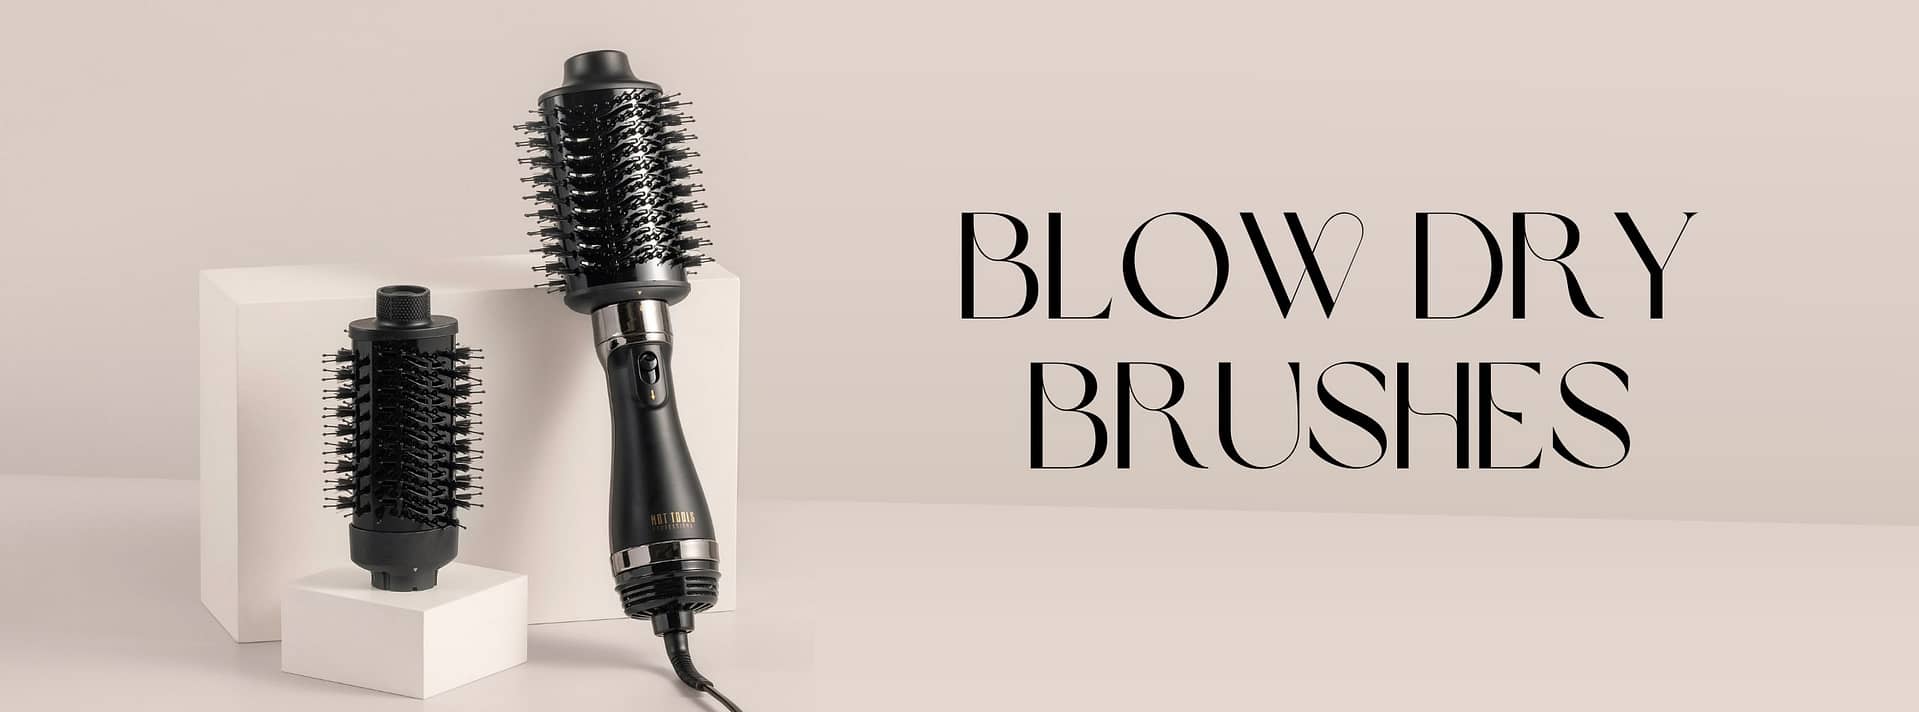 Hot Tools Blow Dry Brushes